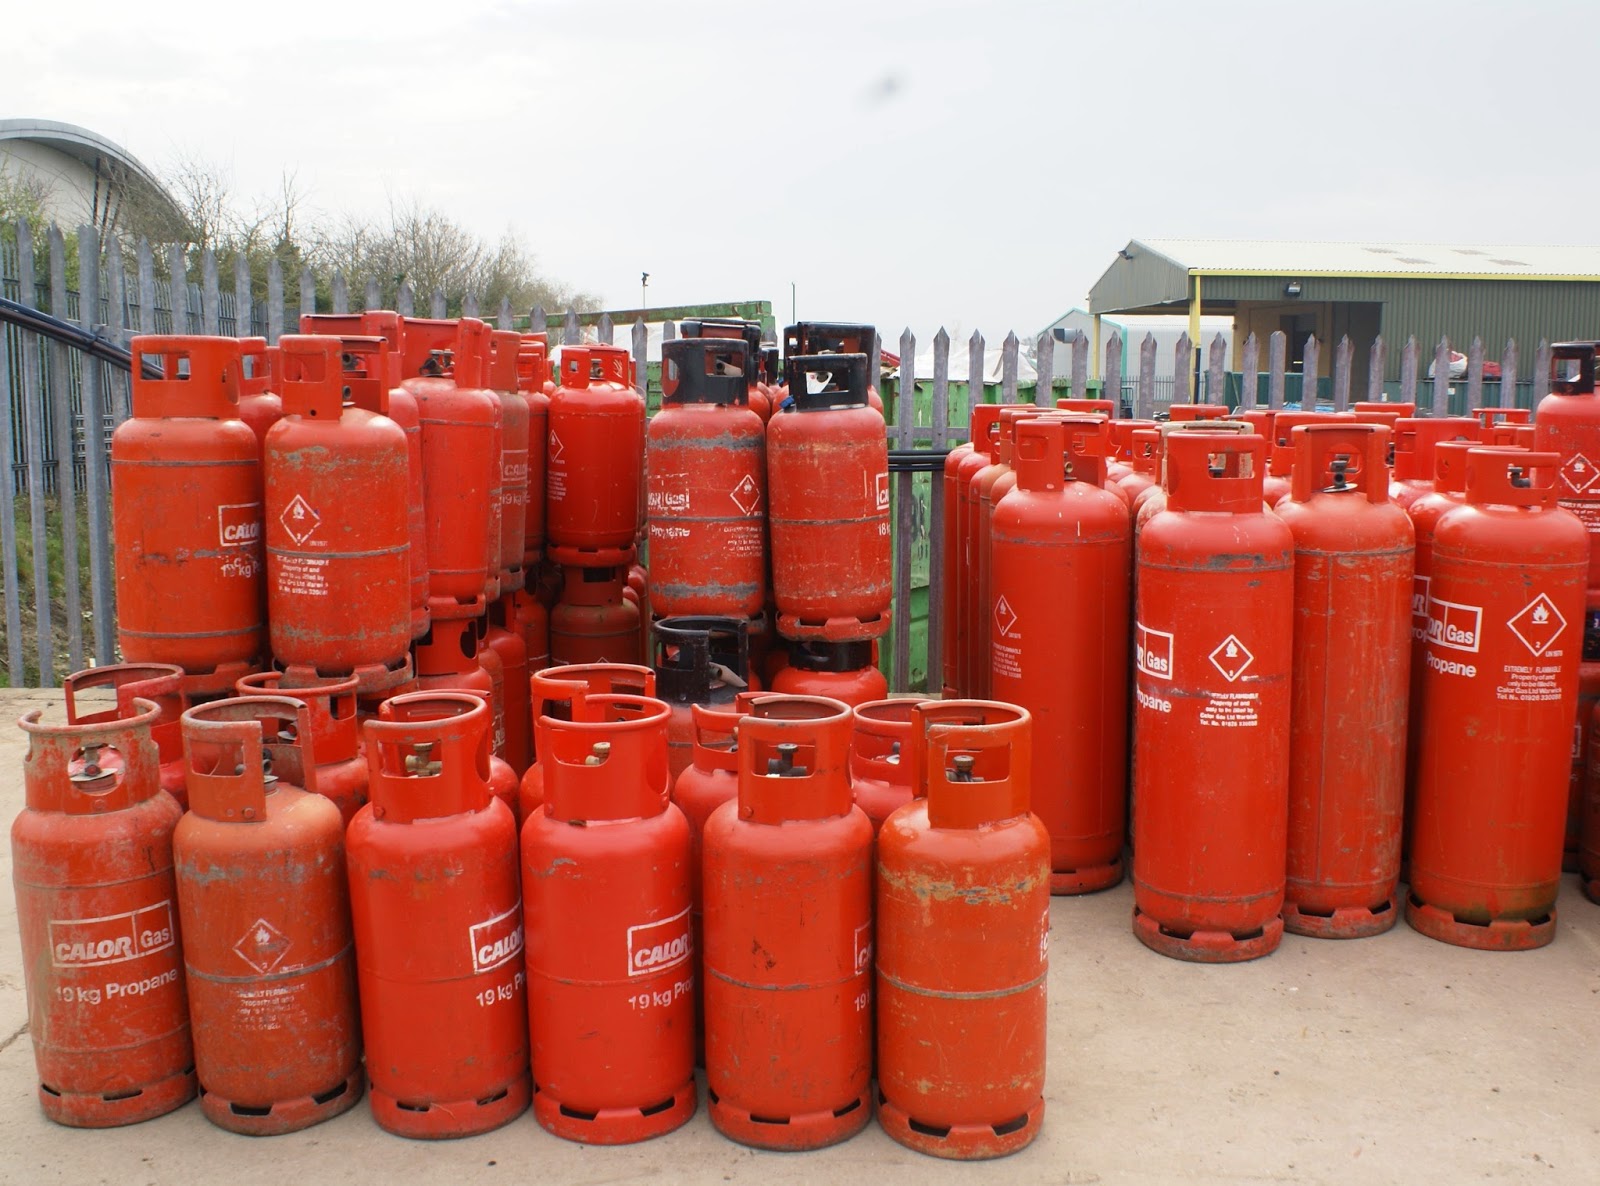 cooking gas